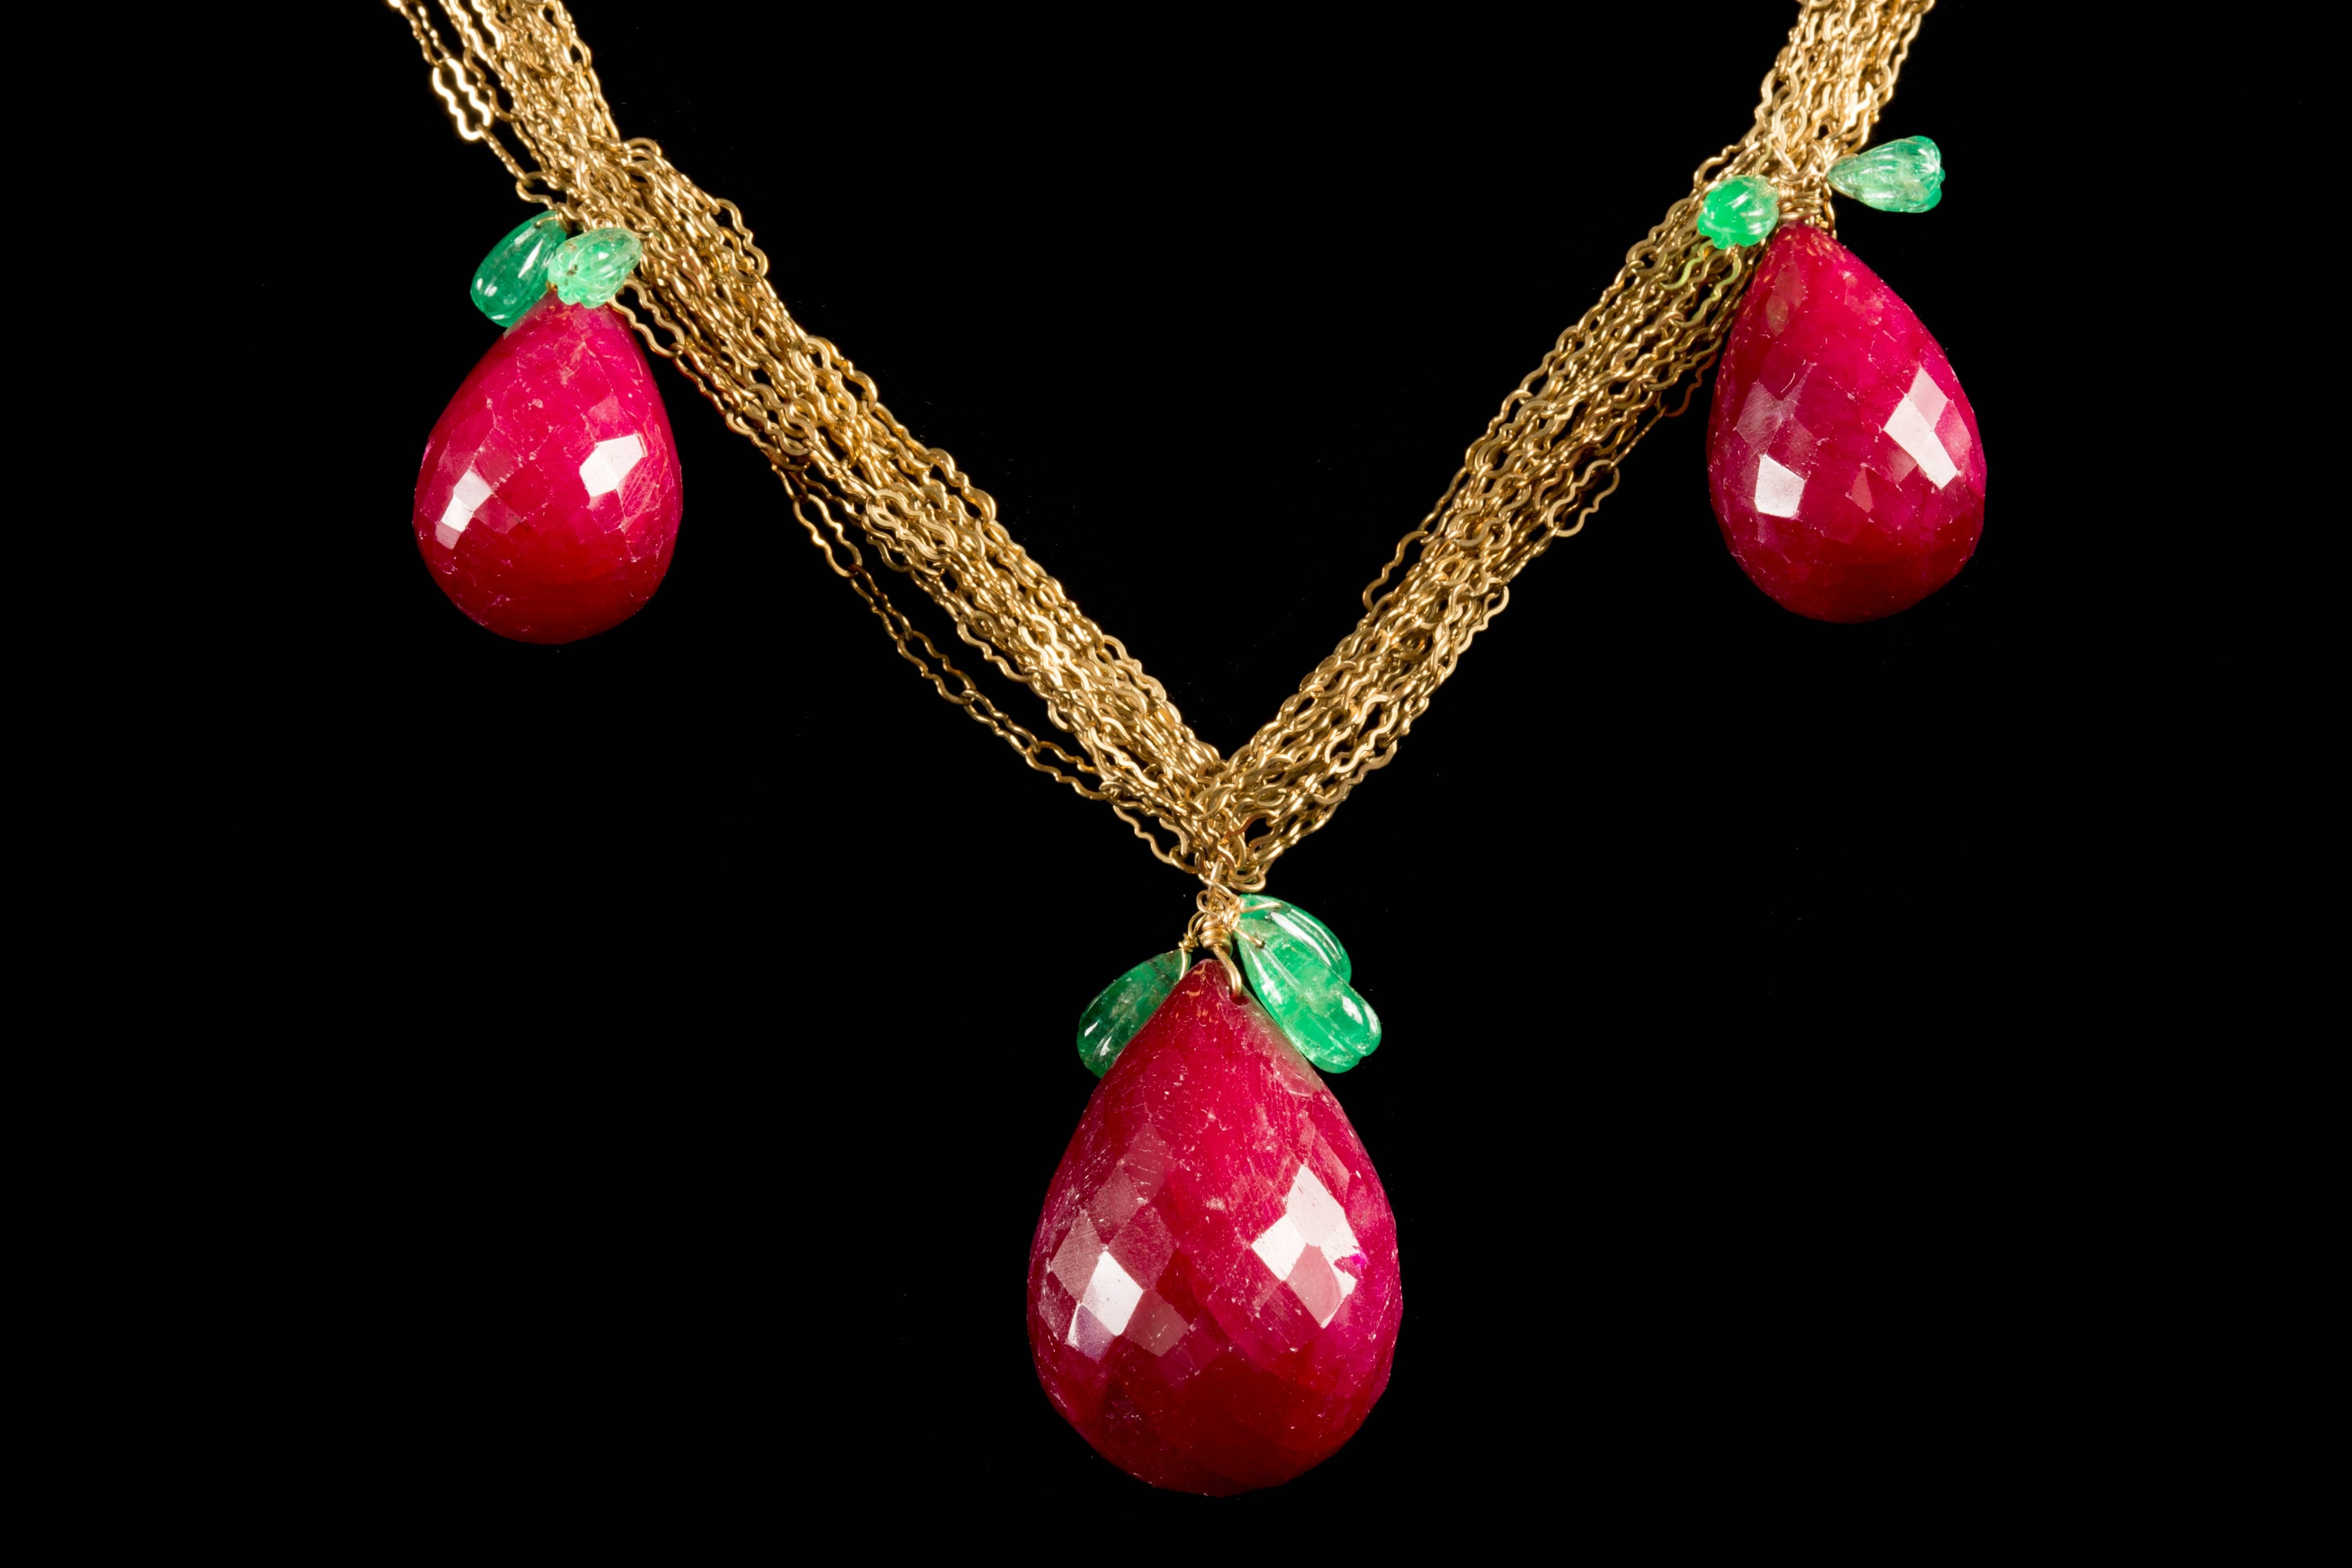 Beautiful Ruby Pear Necklace comprised of 3 briolette rubies, each with emerald leaves interlocked with a gold chain.